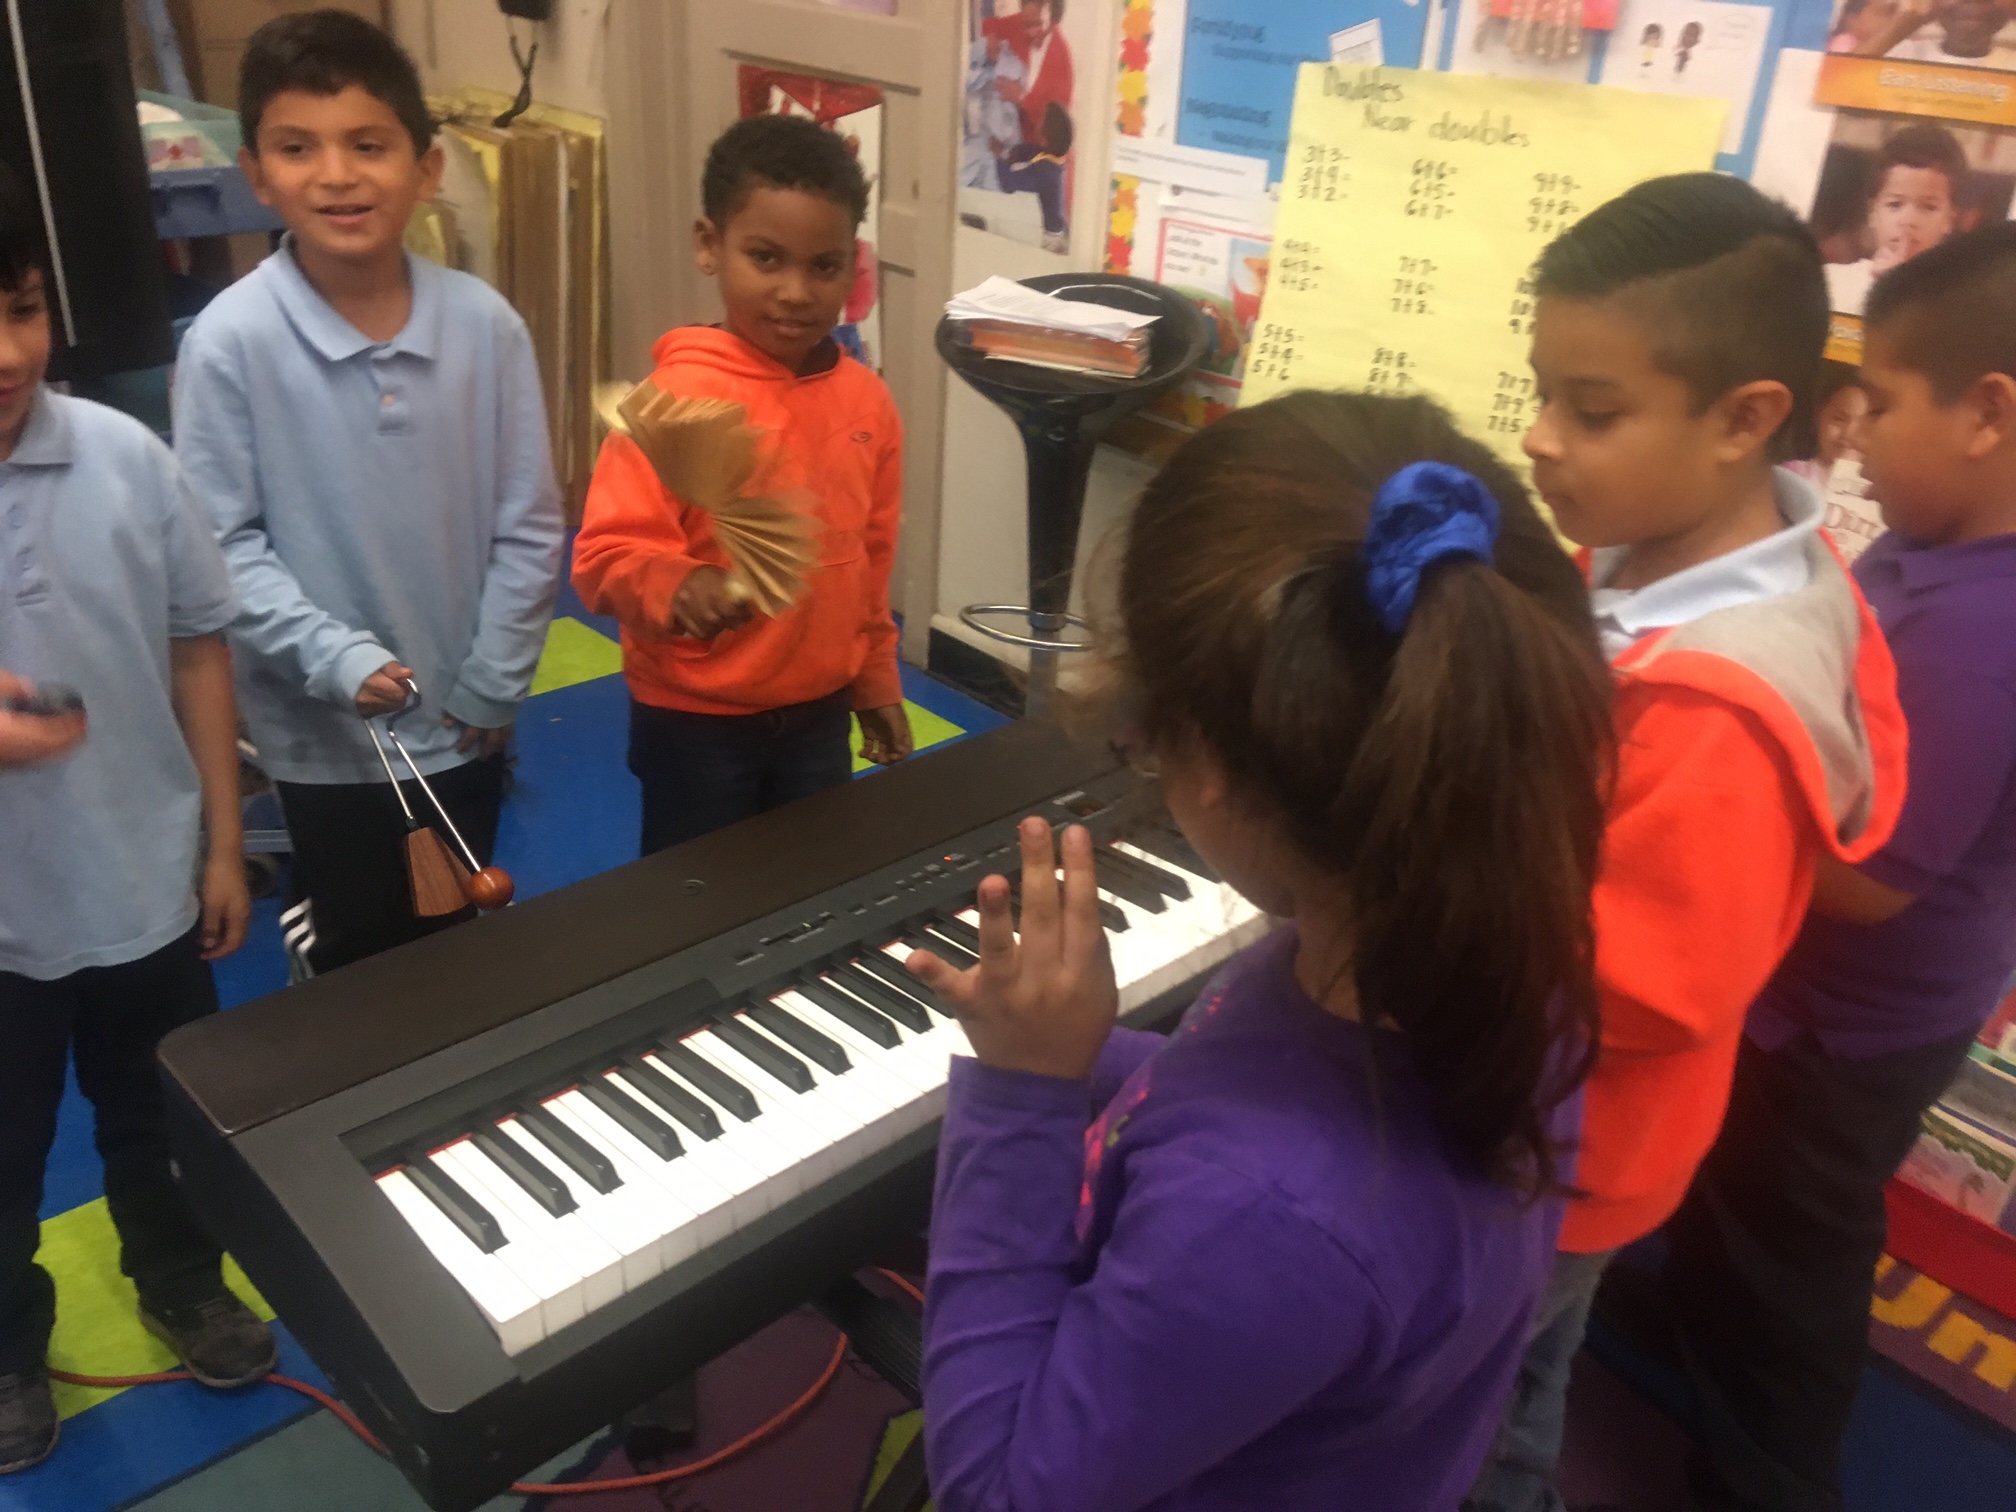 Music in the classroom